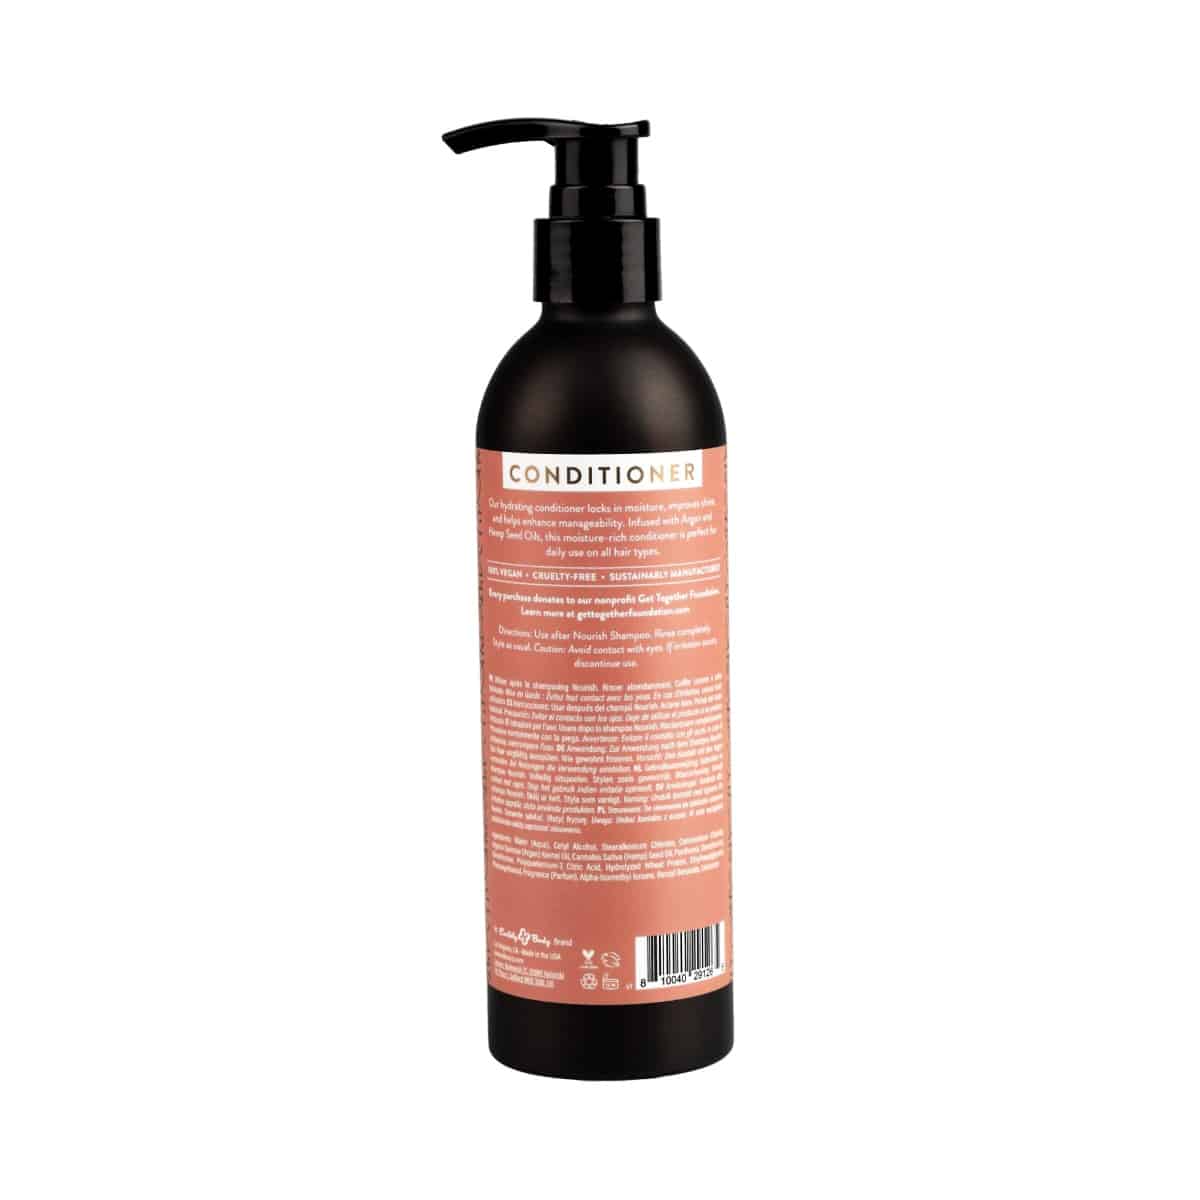 MKS eco Conditioner Isle of You Back Label 2